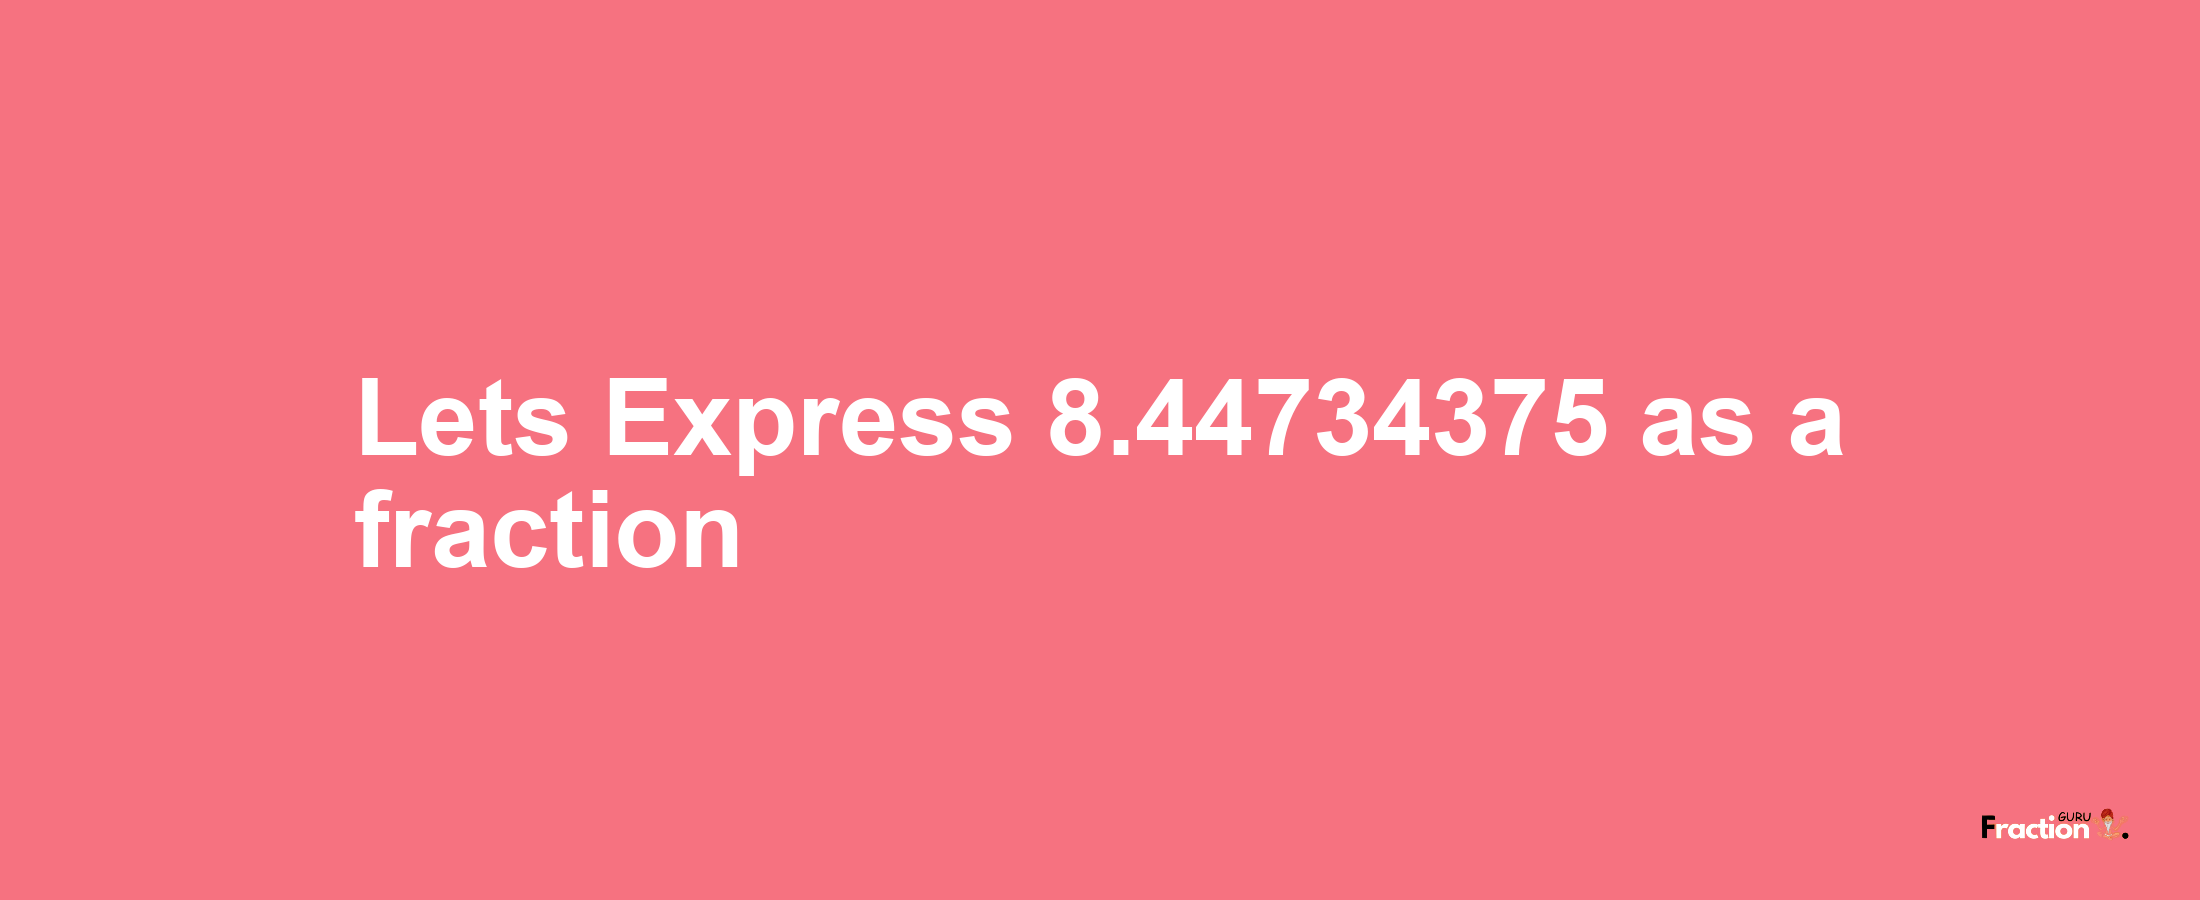 Lets Express 8.44734375 as afraction